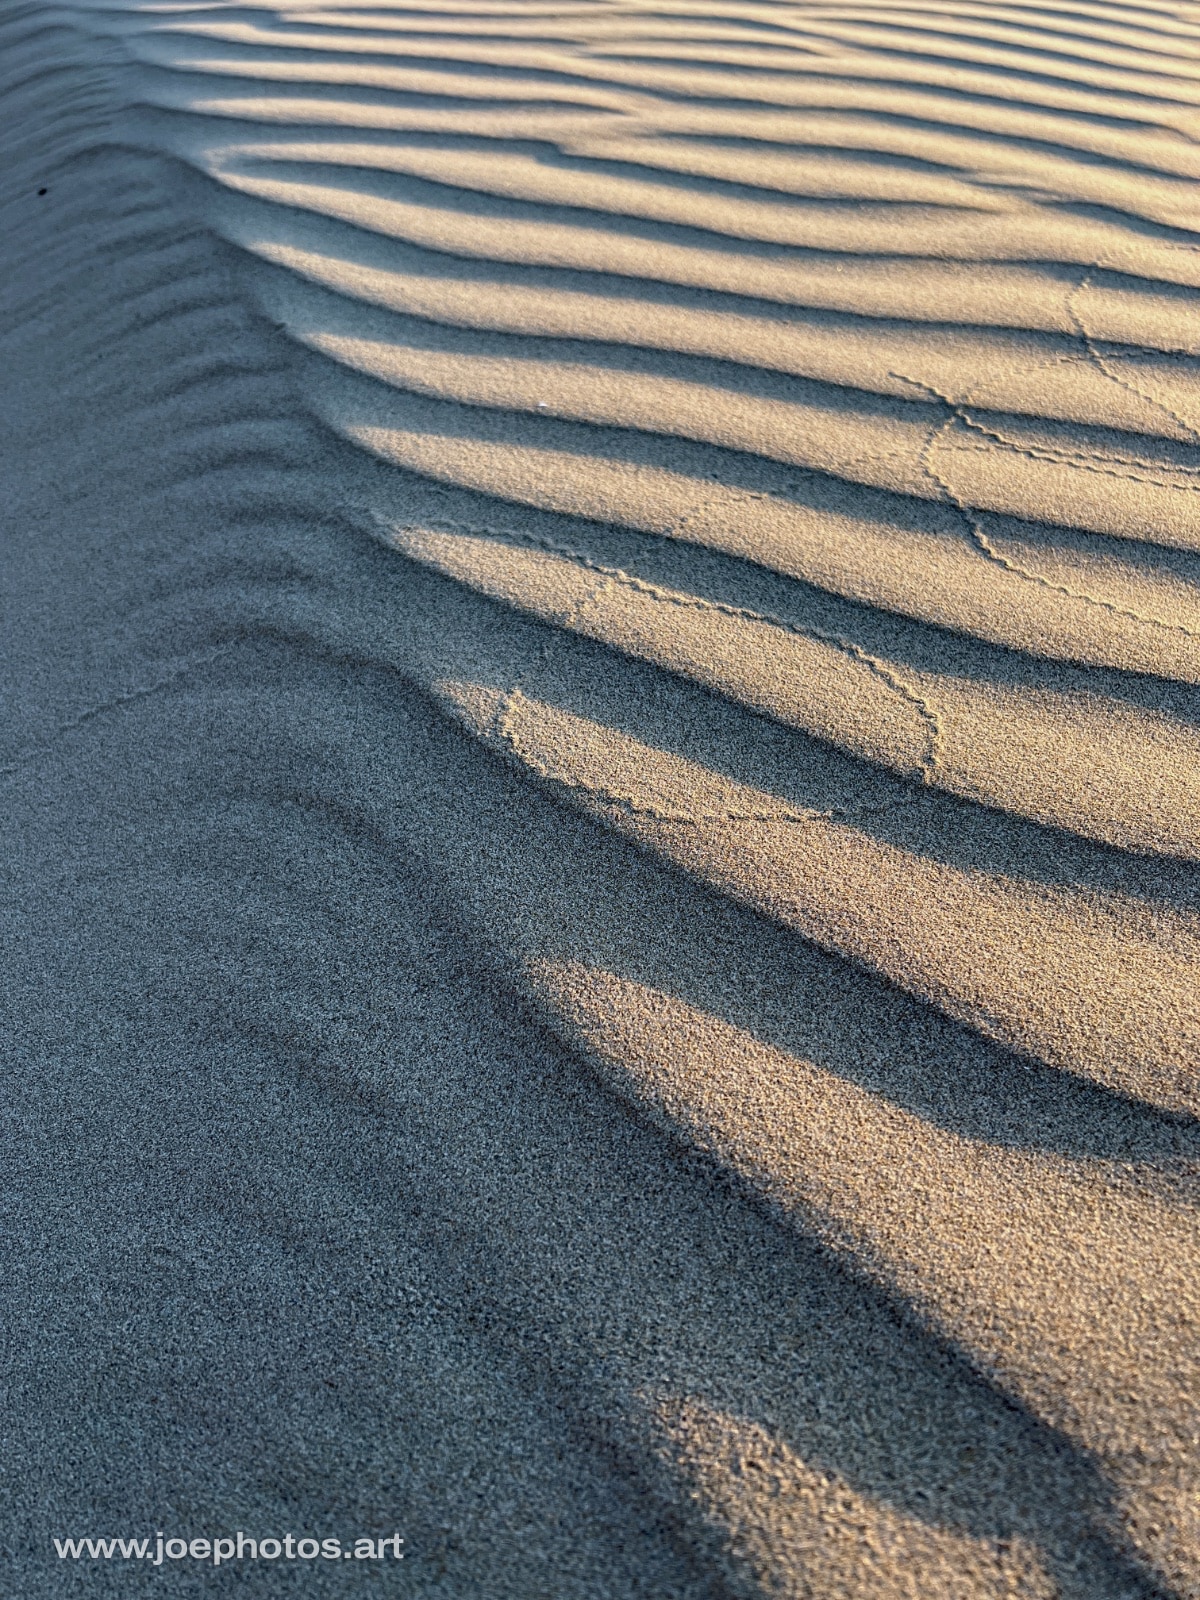 Sand dune ripples and trail.